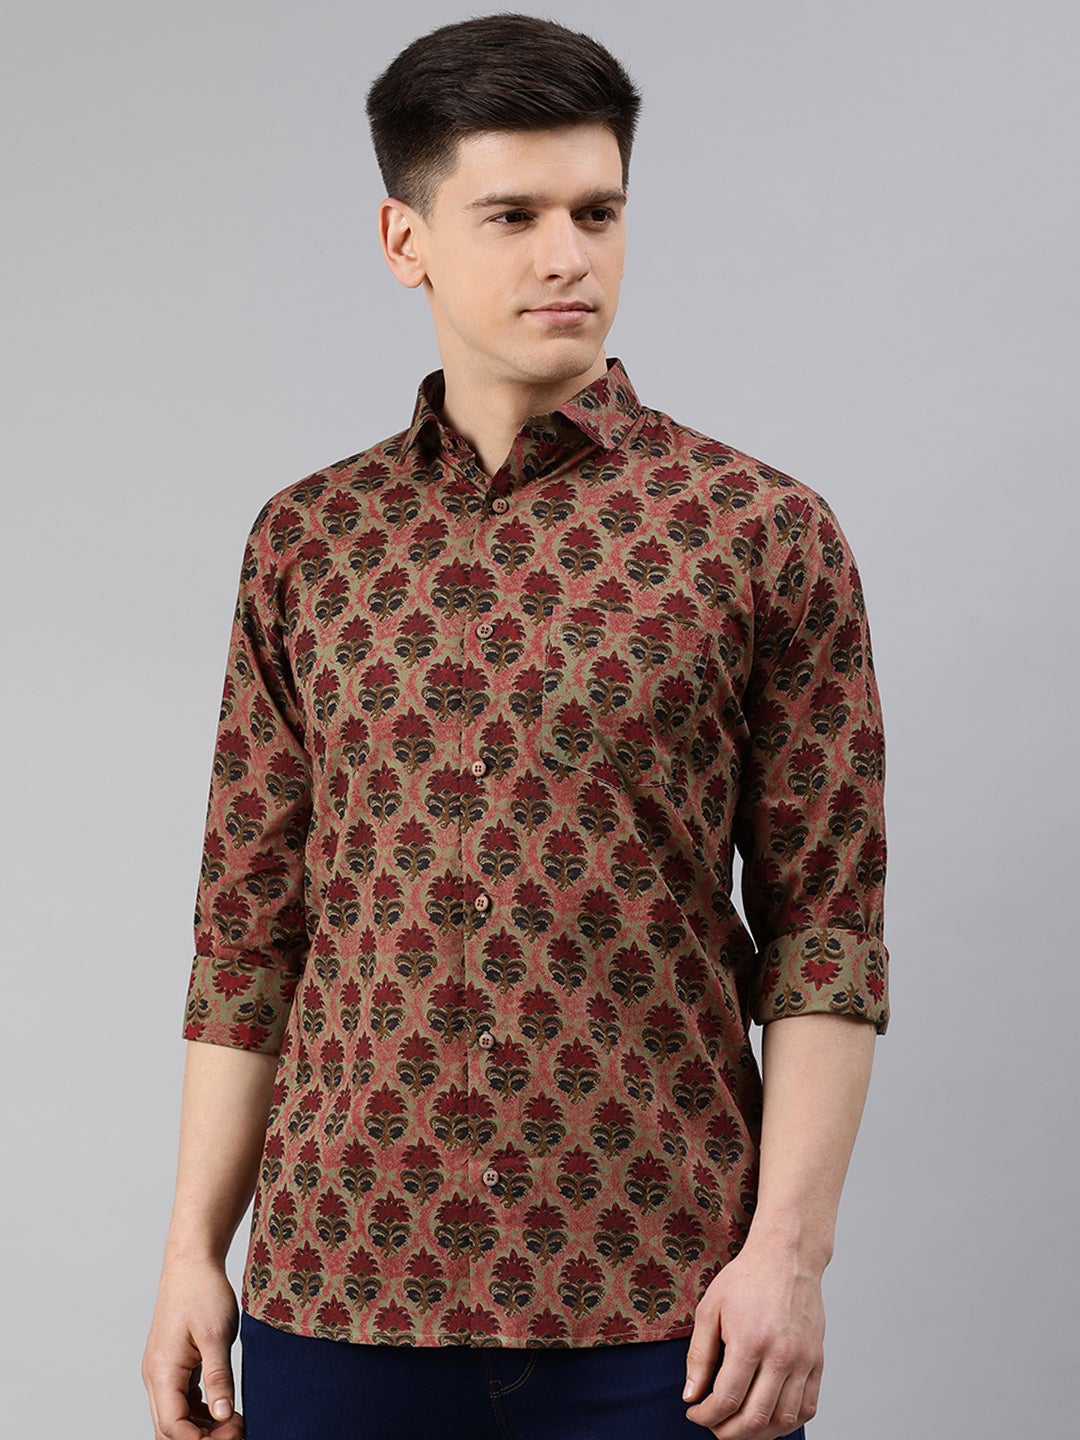 Brown Cotton Full Sleeves Shirts For Men-MMF0245 - NOZ2TOZ